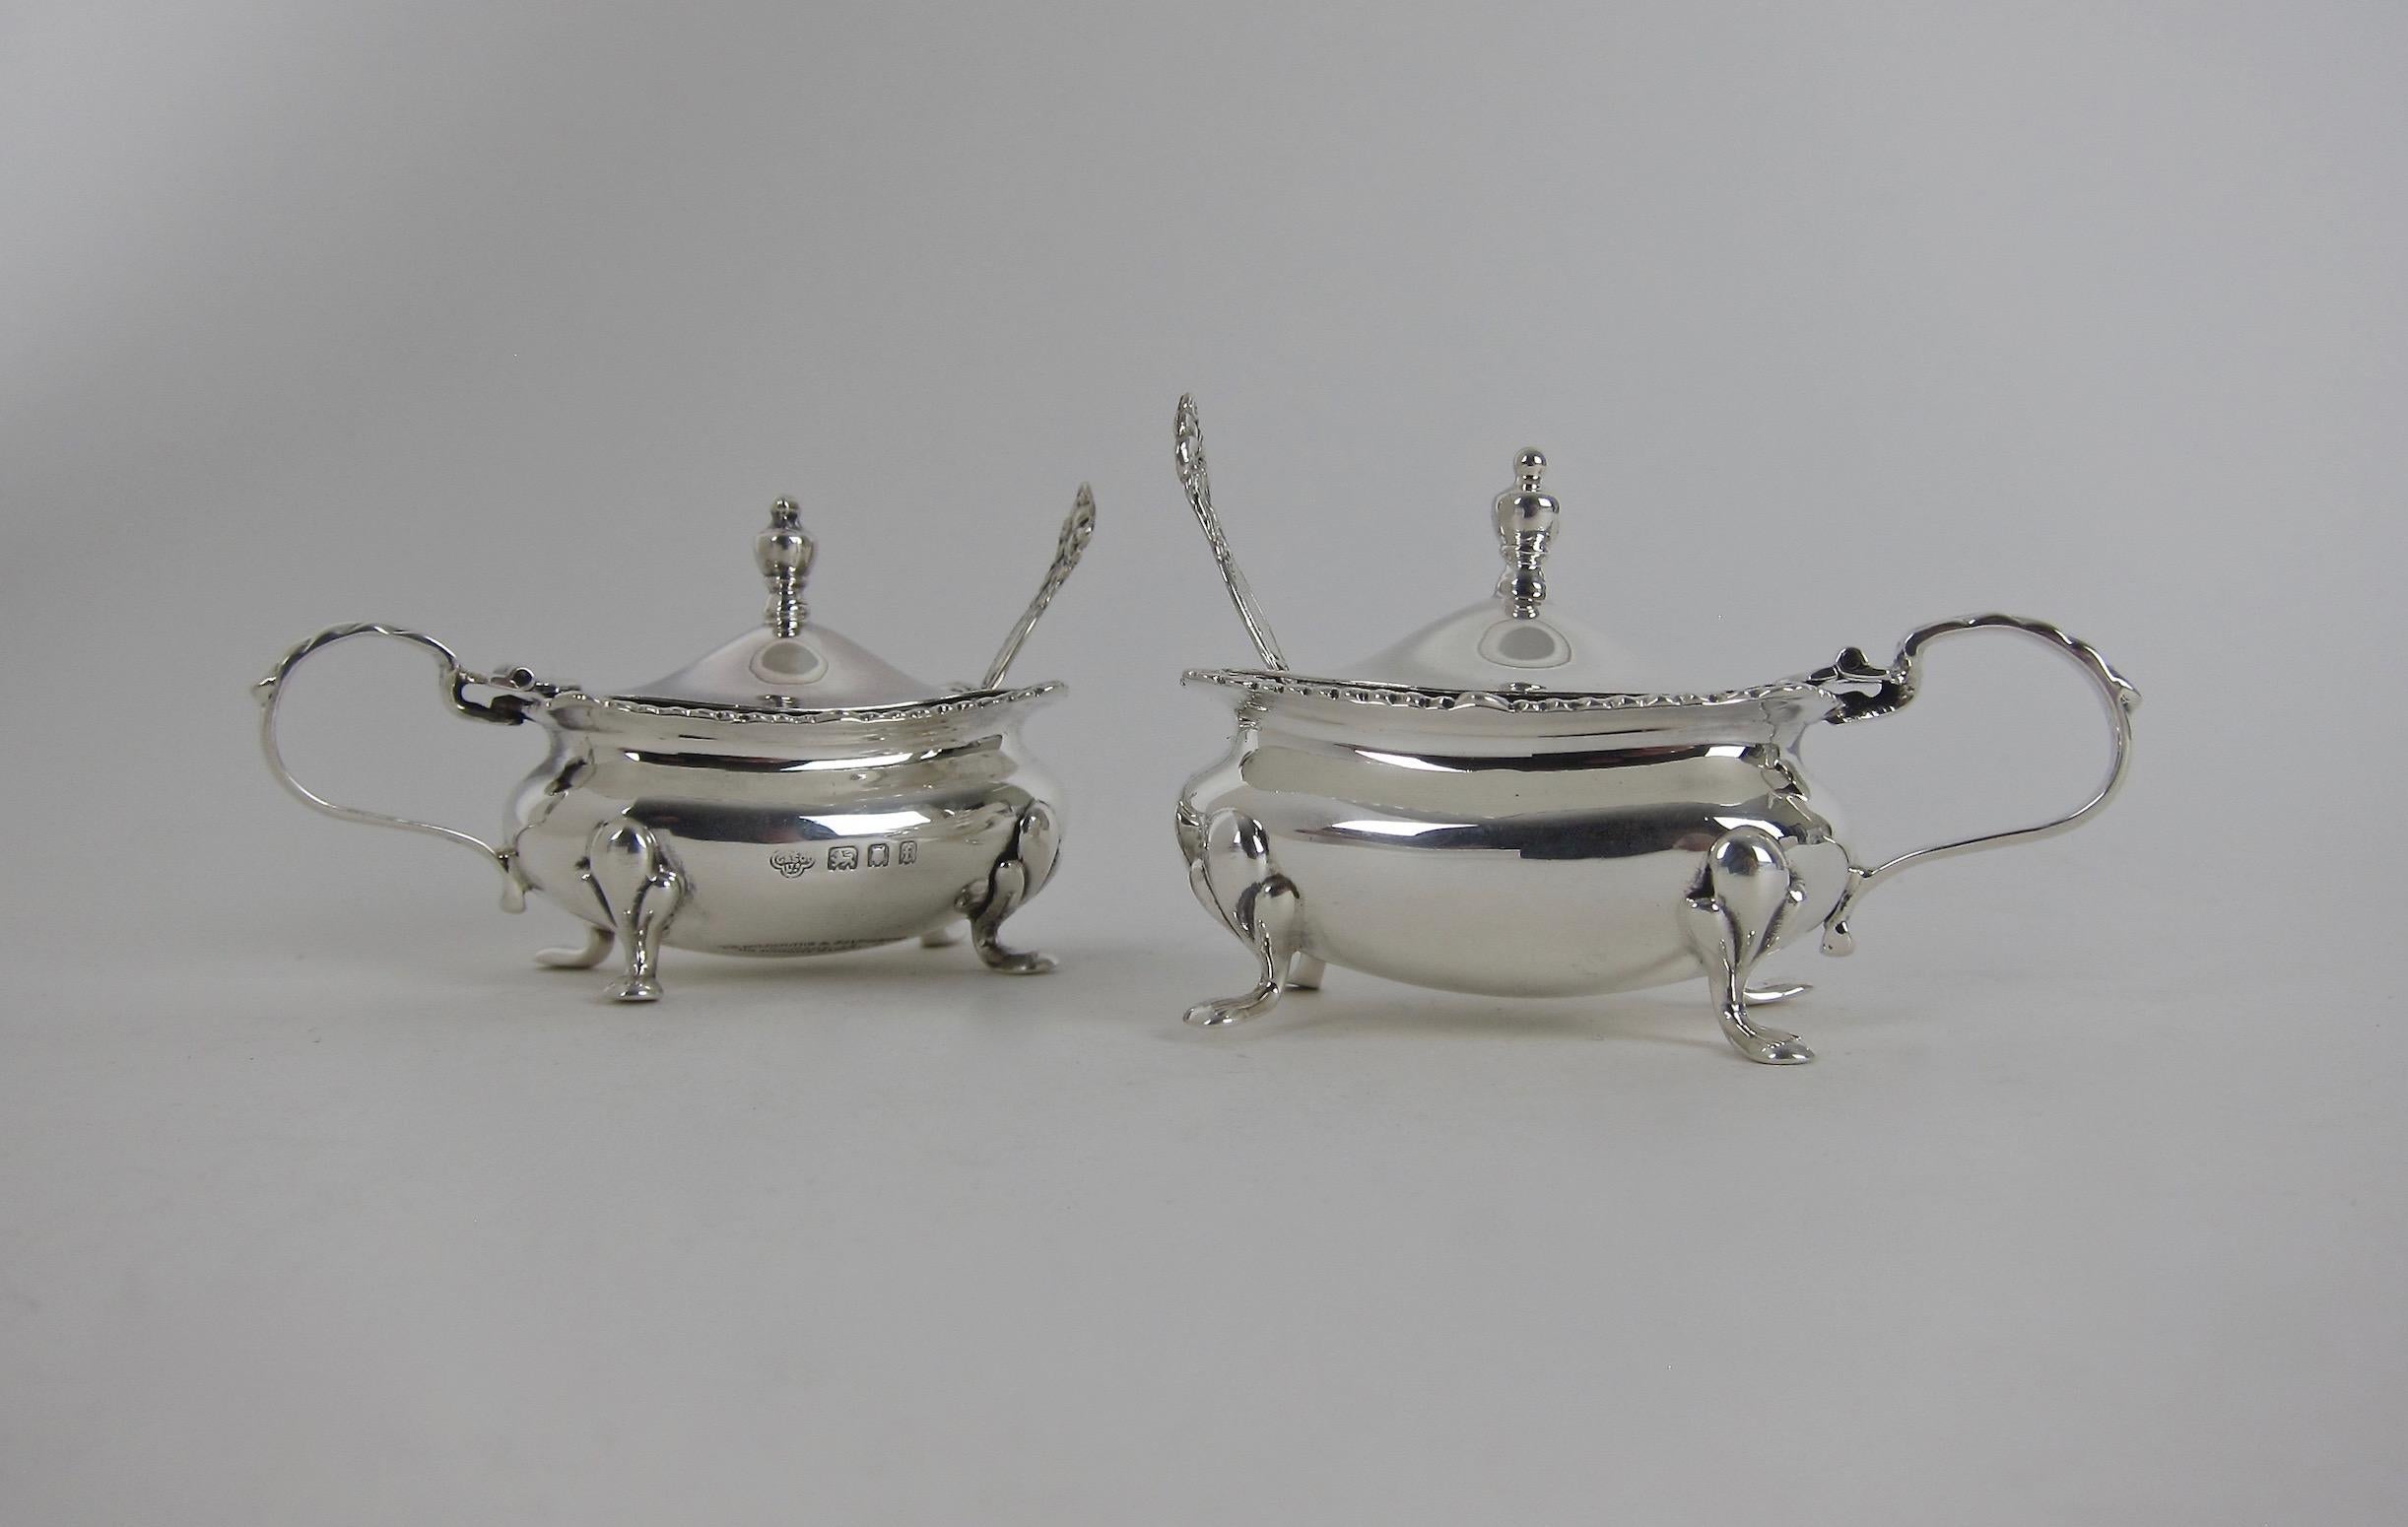 An antique pair of English sterling silver mustard pots with spoons, hallmarked for London in 1921 and 1922 with maker's marks for The Goldsmiths & Silversmiths Co. Ltd. at 112 Regent Street in London.

The unembellished oval bodies were decorated